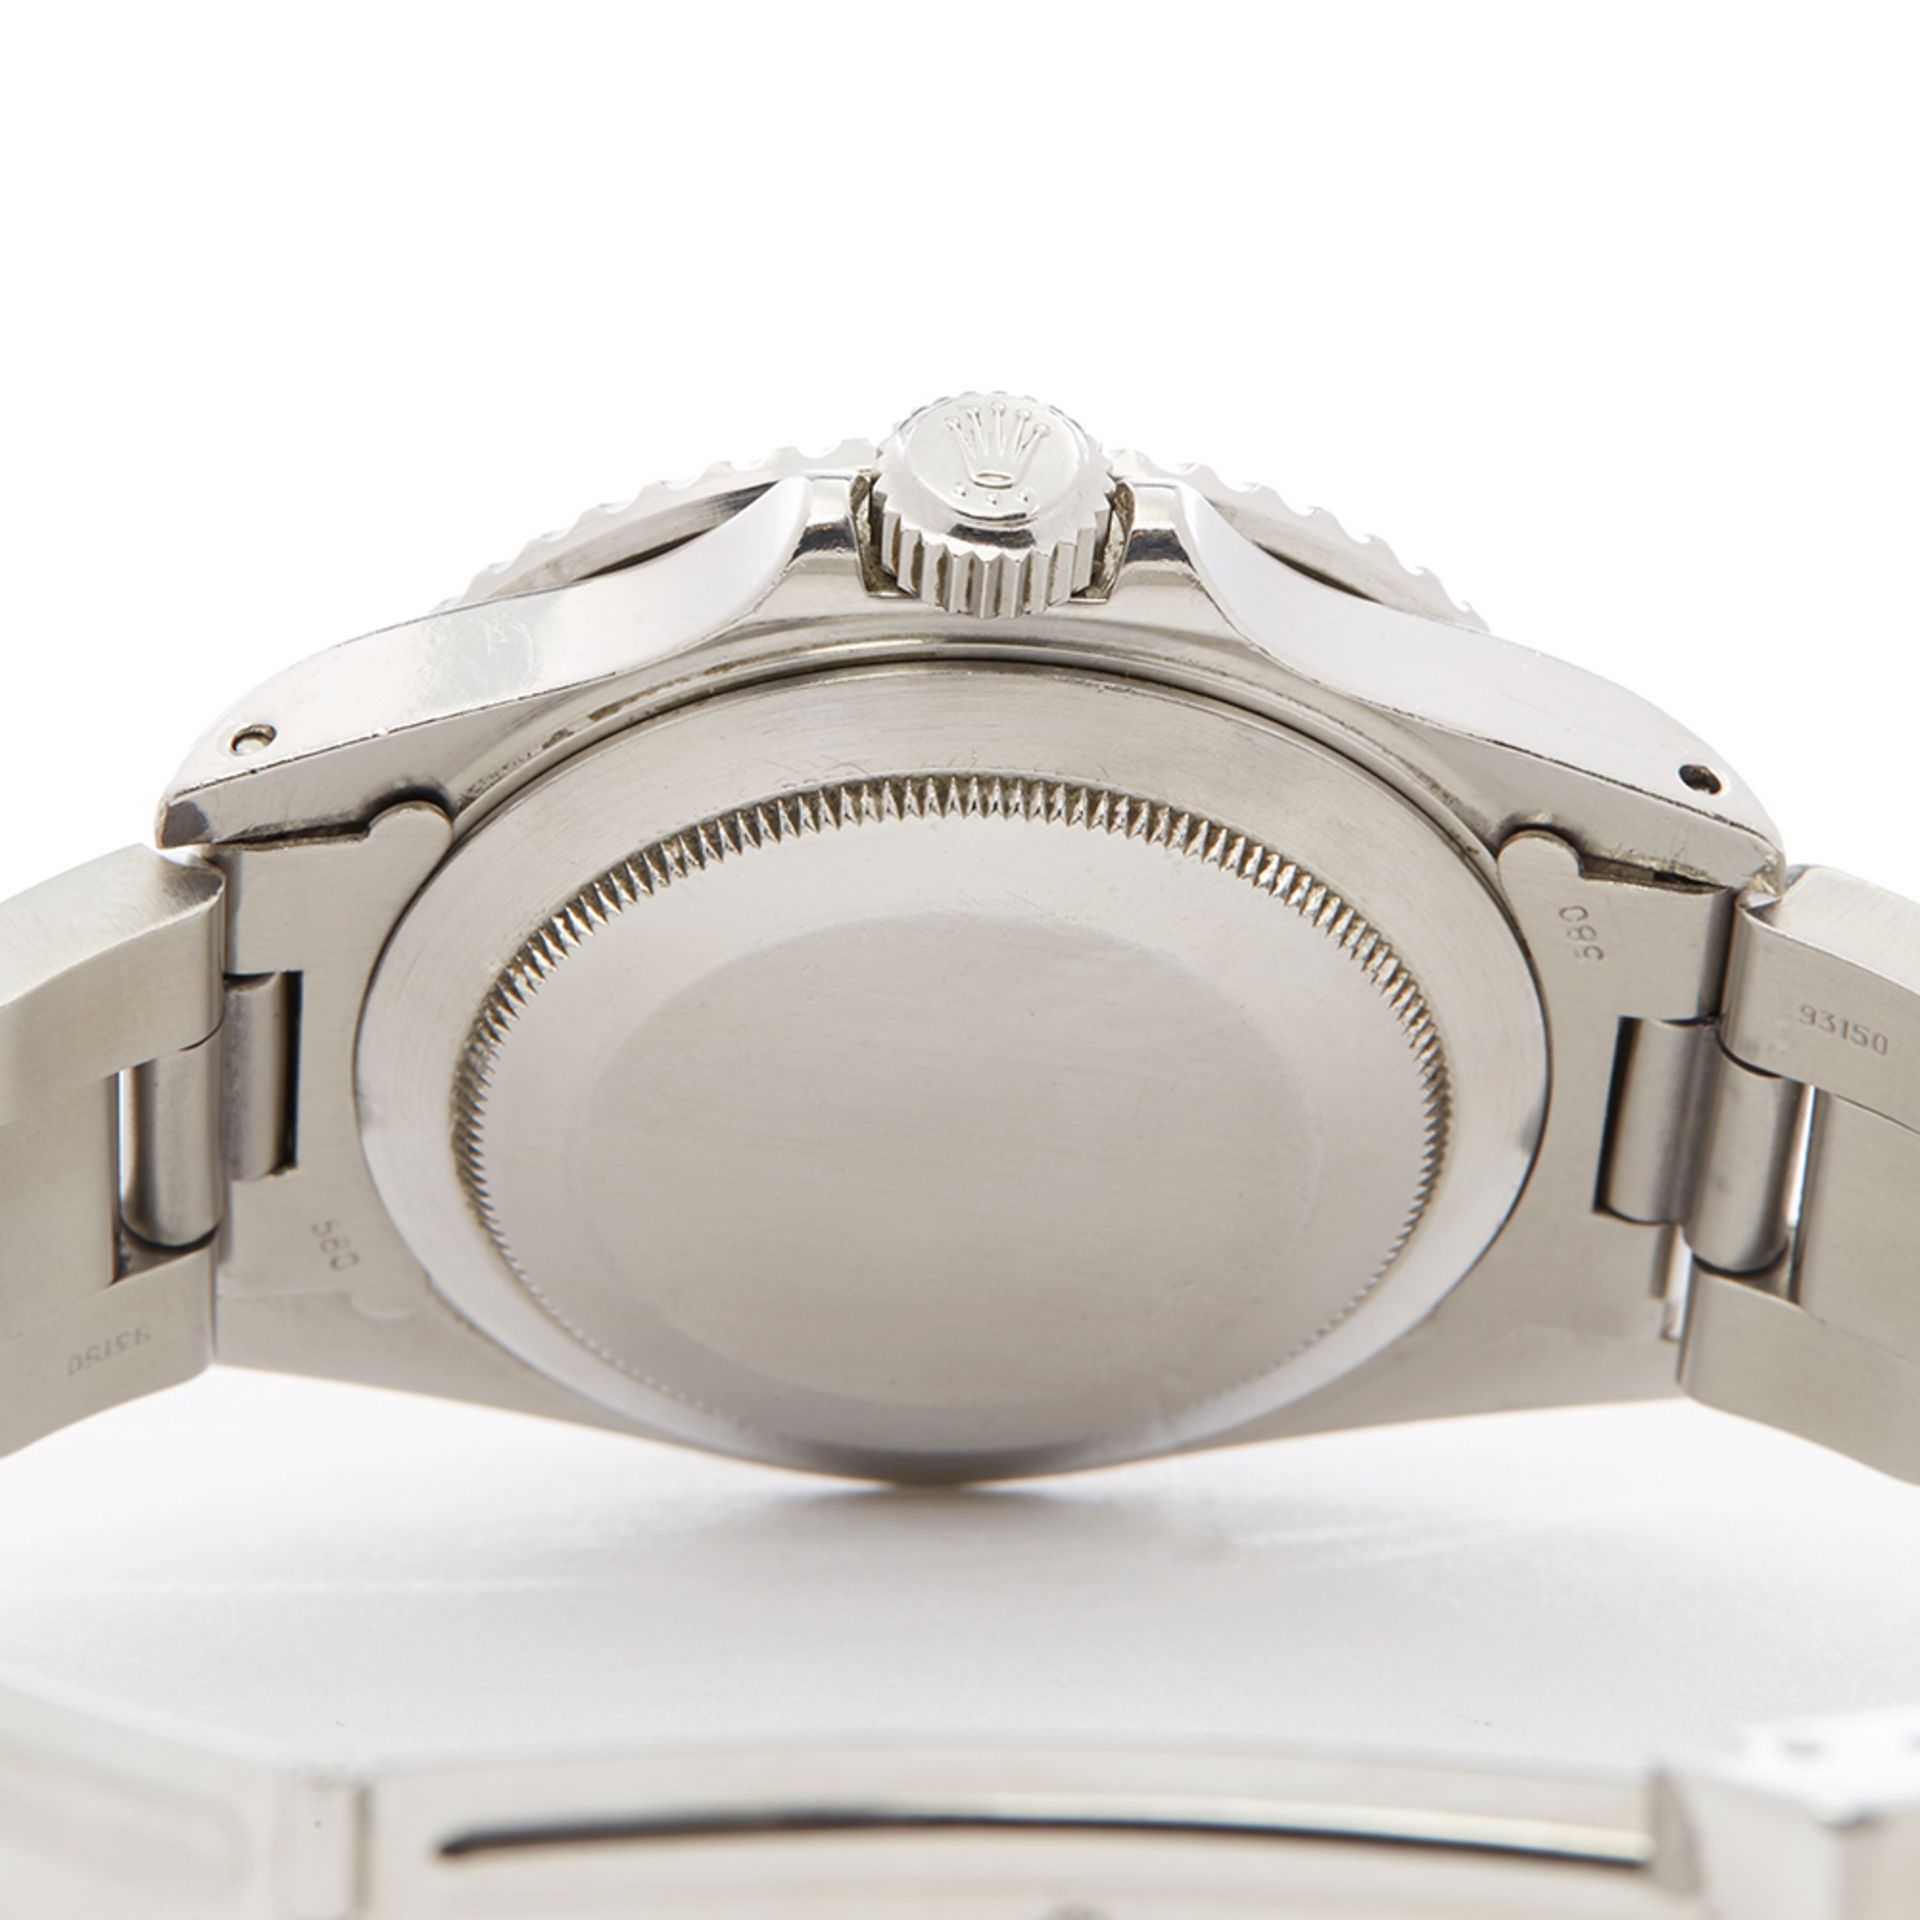 Submariner Stainless Steel - 16800 - Image 7 of 7